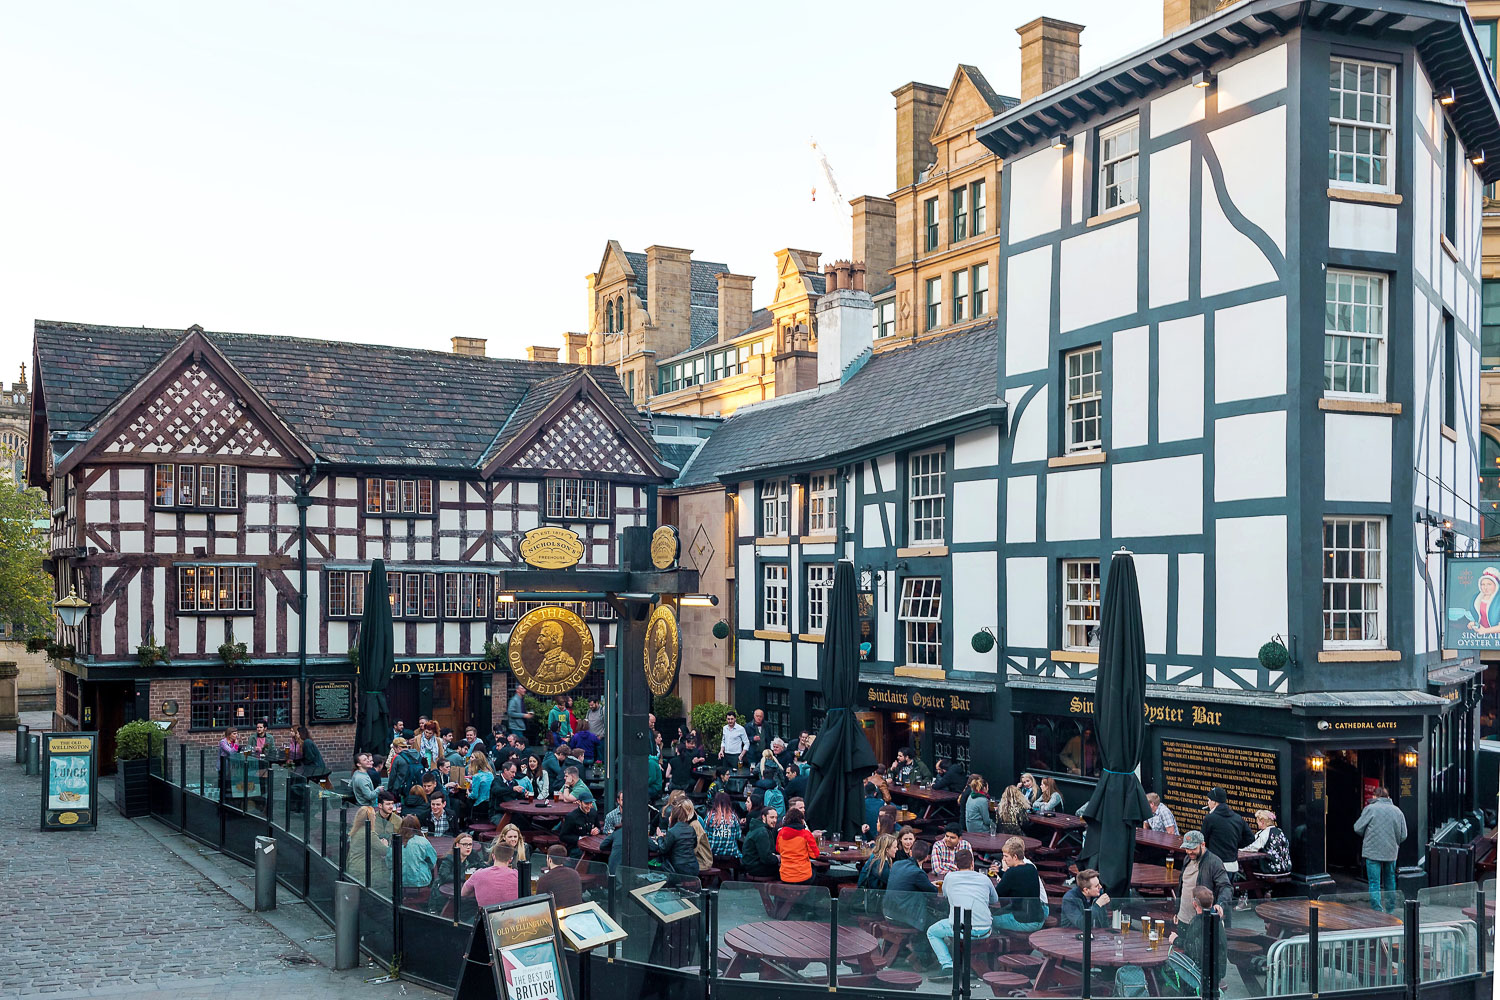 Shambles Square in Manchester.  A great spot to grab a drink outside!